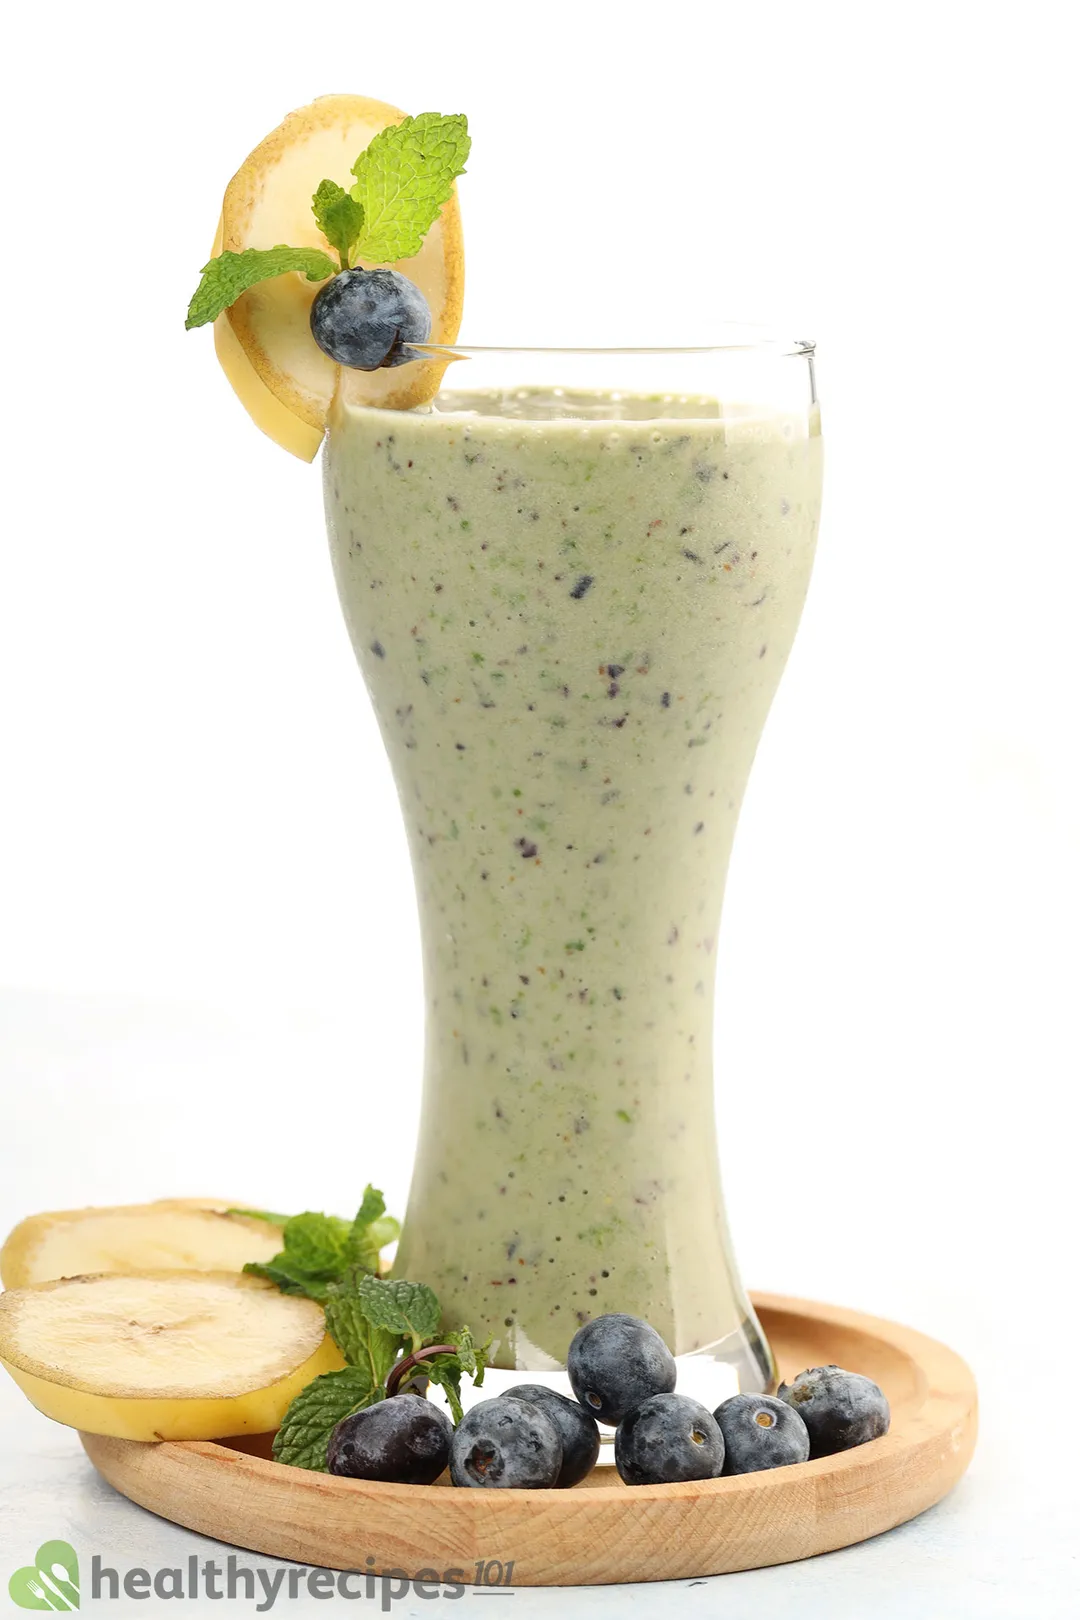 a glass of blueberry kale smoothie on a wooden tray, decorated with banana slices, mint and blueberries